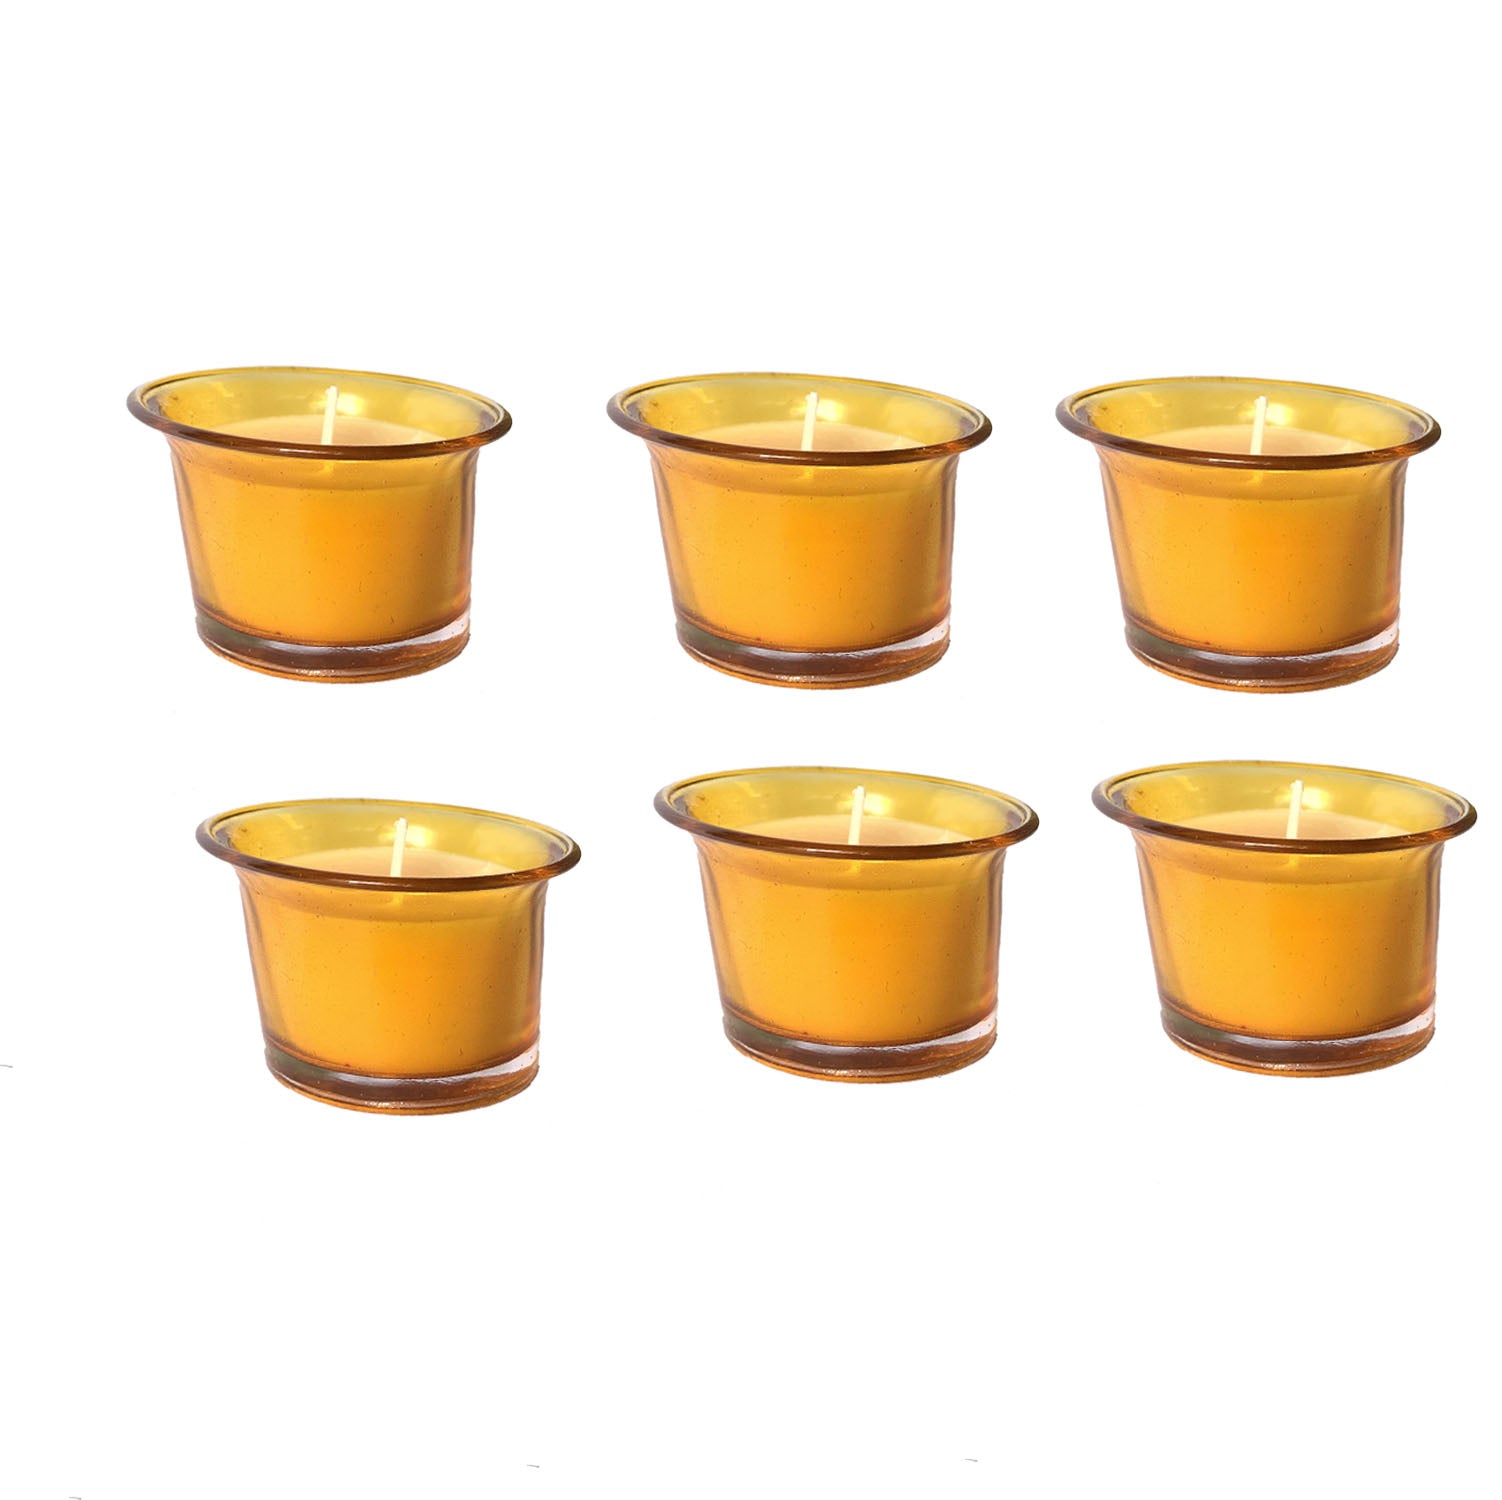 Hosley Highly Fragranced Sweet Pea Jasmine Filled Votive Glass Candles / Candle Holder for Decoration Candles, Pack of 6, Yellow